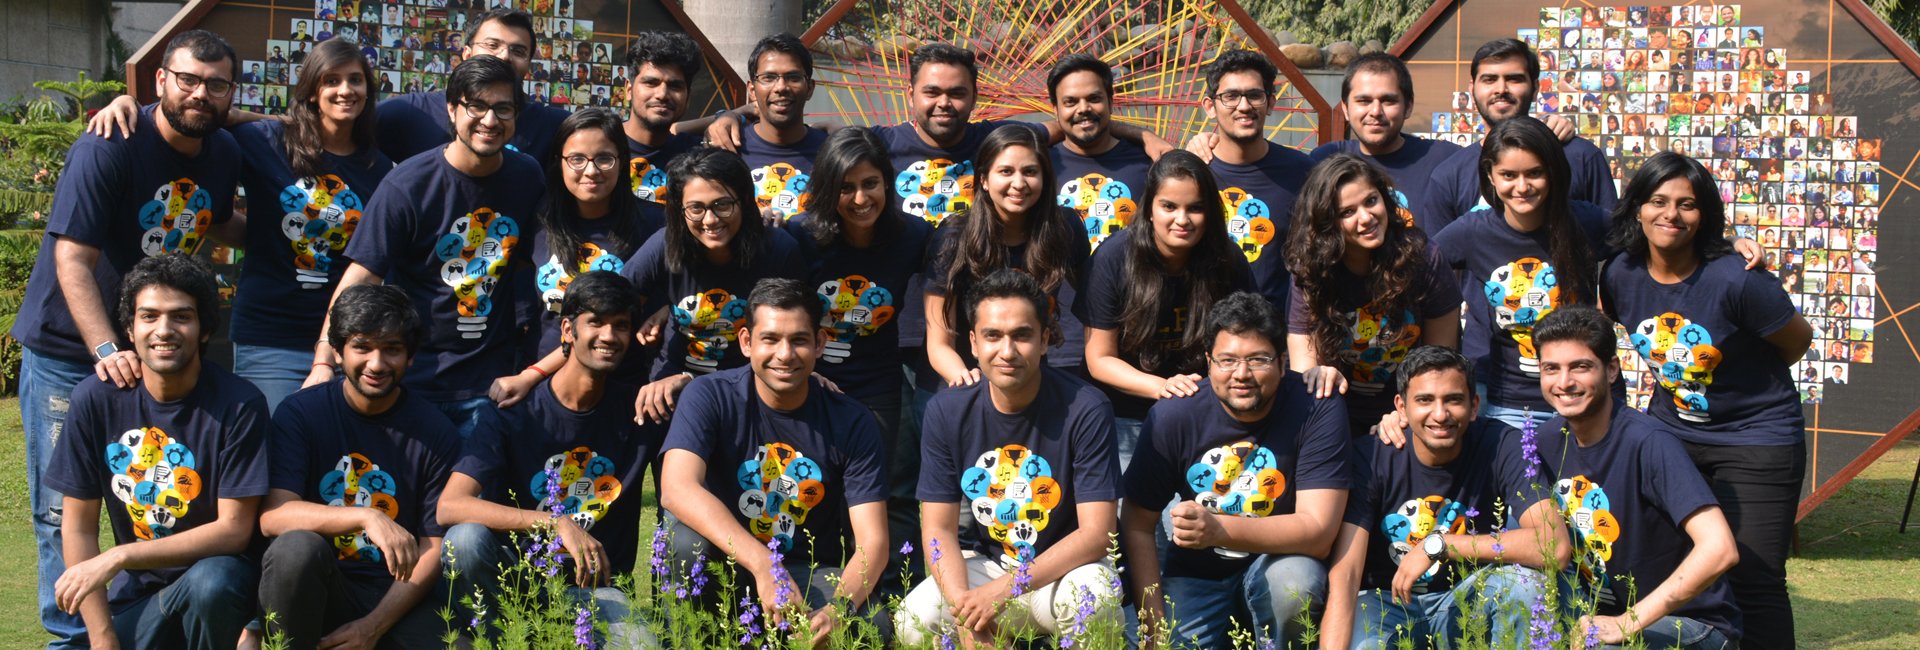 XLRI Final Placement 2019 records average salary at INR 22.35 Lakh